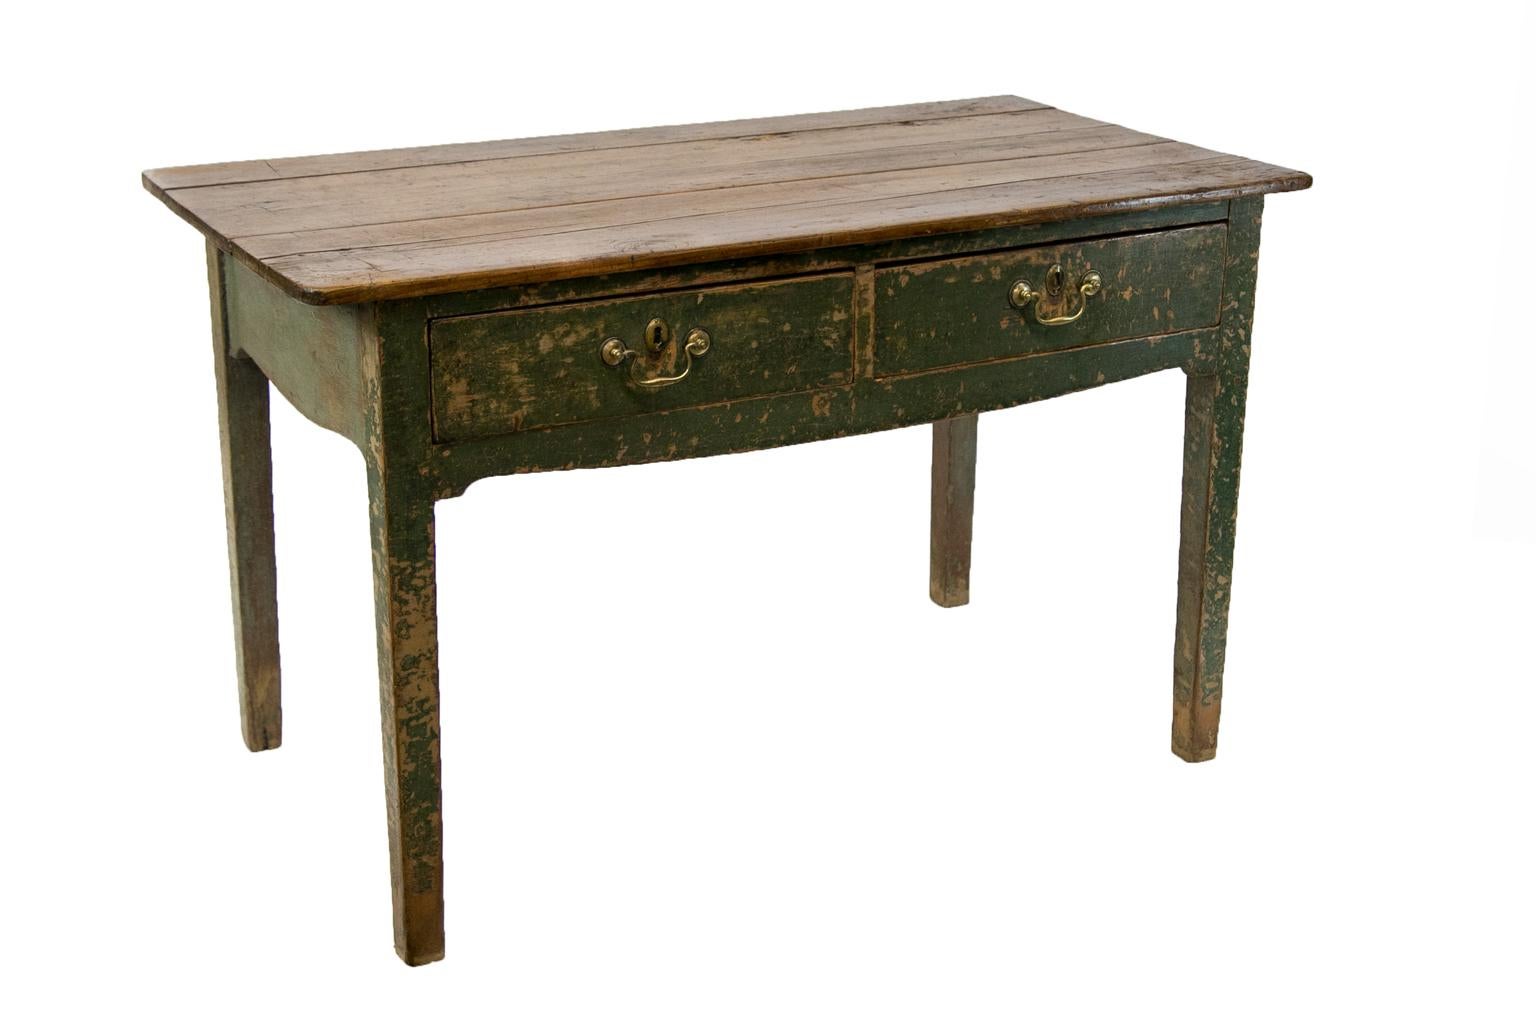 Mid-19th Century Two-Drawer English Pine Painted Table